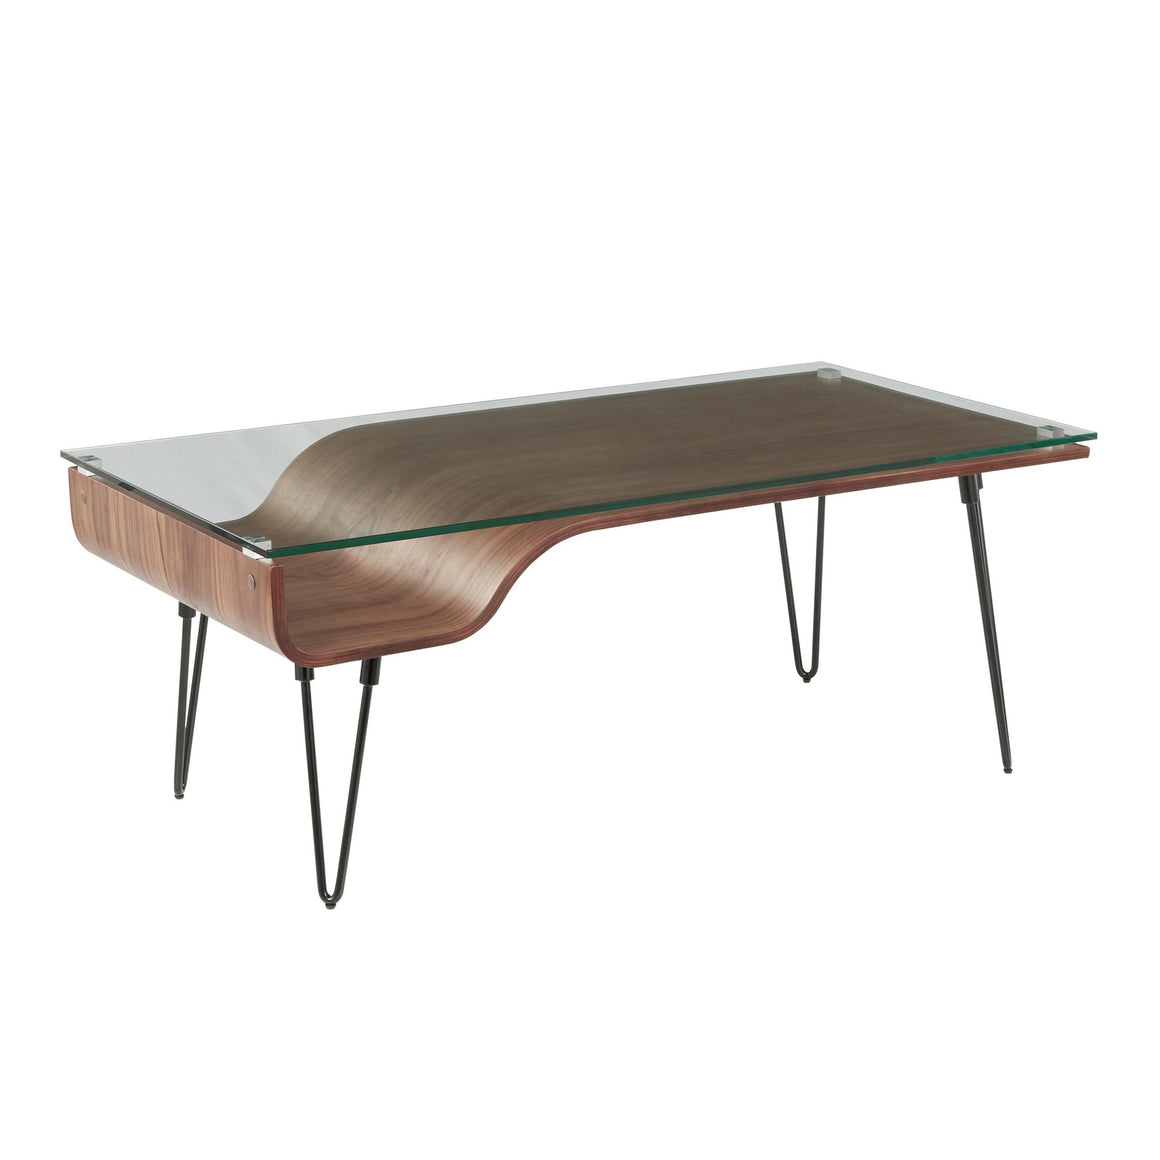 Avery Mid-Century Modern Coffee Table in Walnut Wood, Clear Glass, and Black Metal by Lumisource